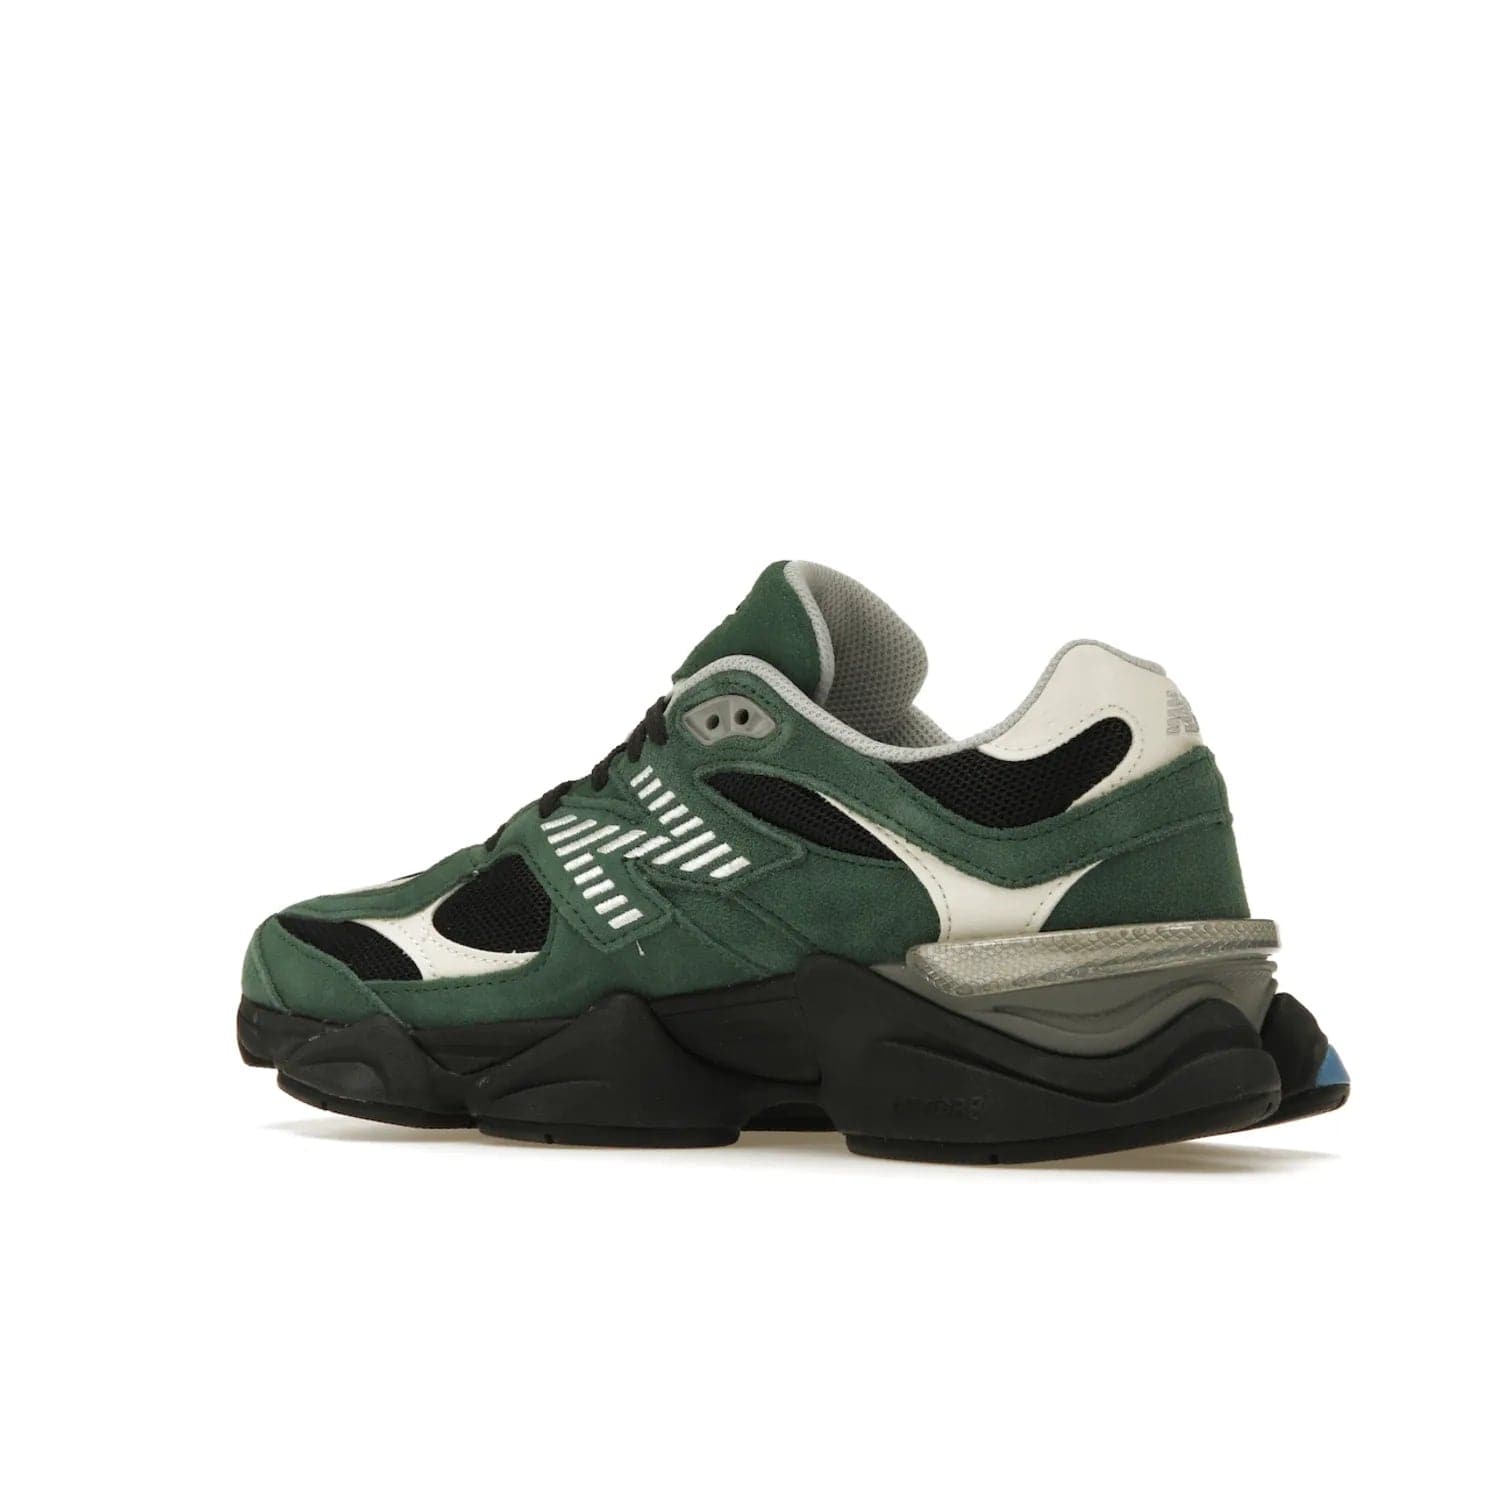 New Balance 9060 Team Forest Green - Image 22 - Only at www.BallersClubKickz.com - Introducing the New Balance 9060 Team Forest Green! Durable statement sneaker with a vibrant forest green upper and contrast detailing. Release date 2023-04-04 - don't miss out!